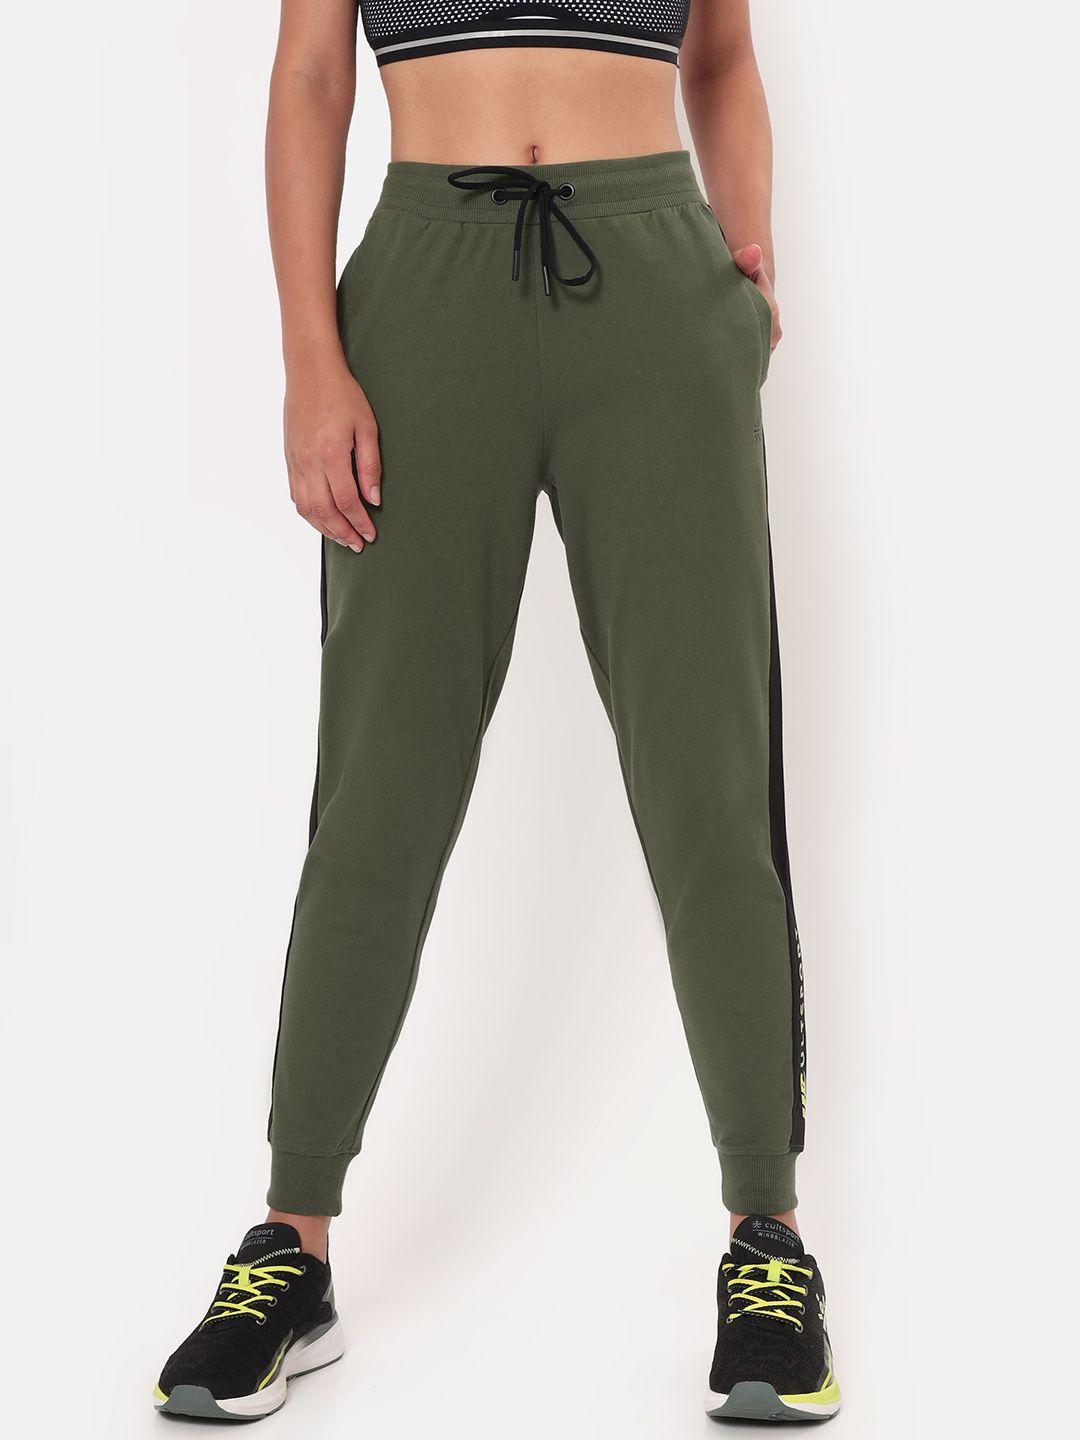 cultsport women olive green solid cotton joggers